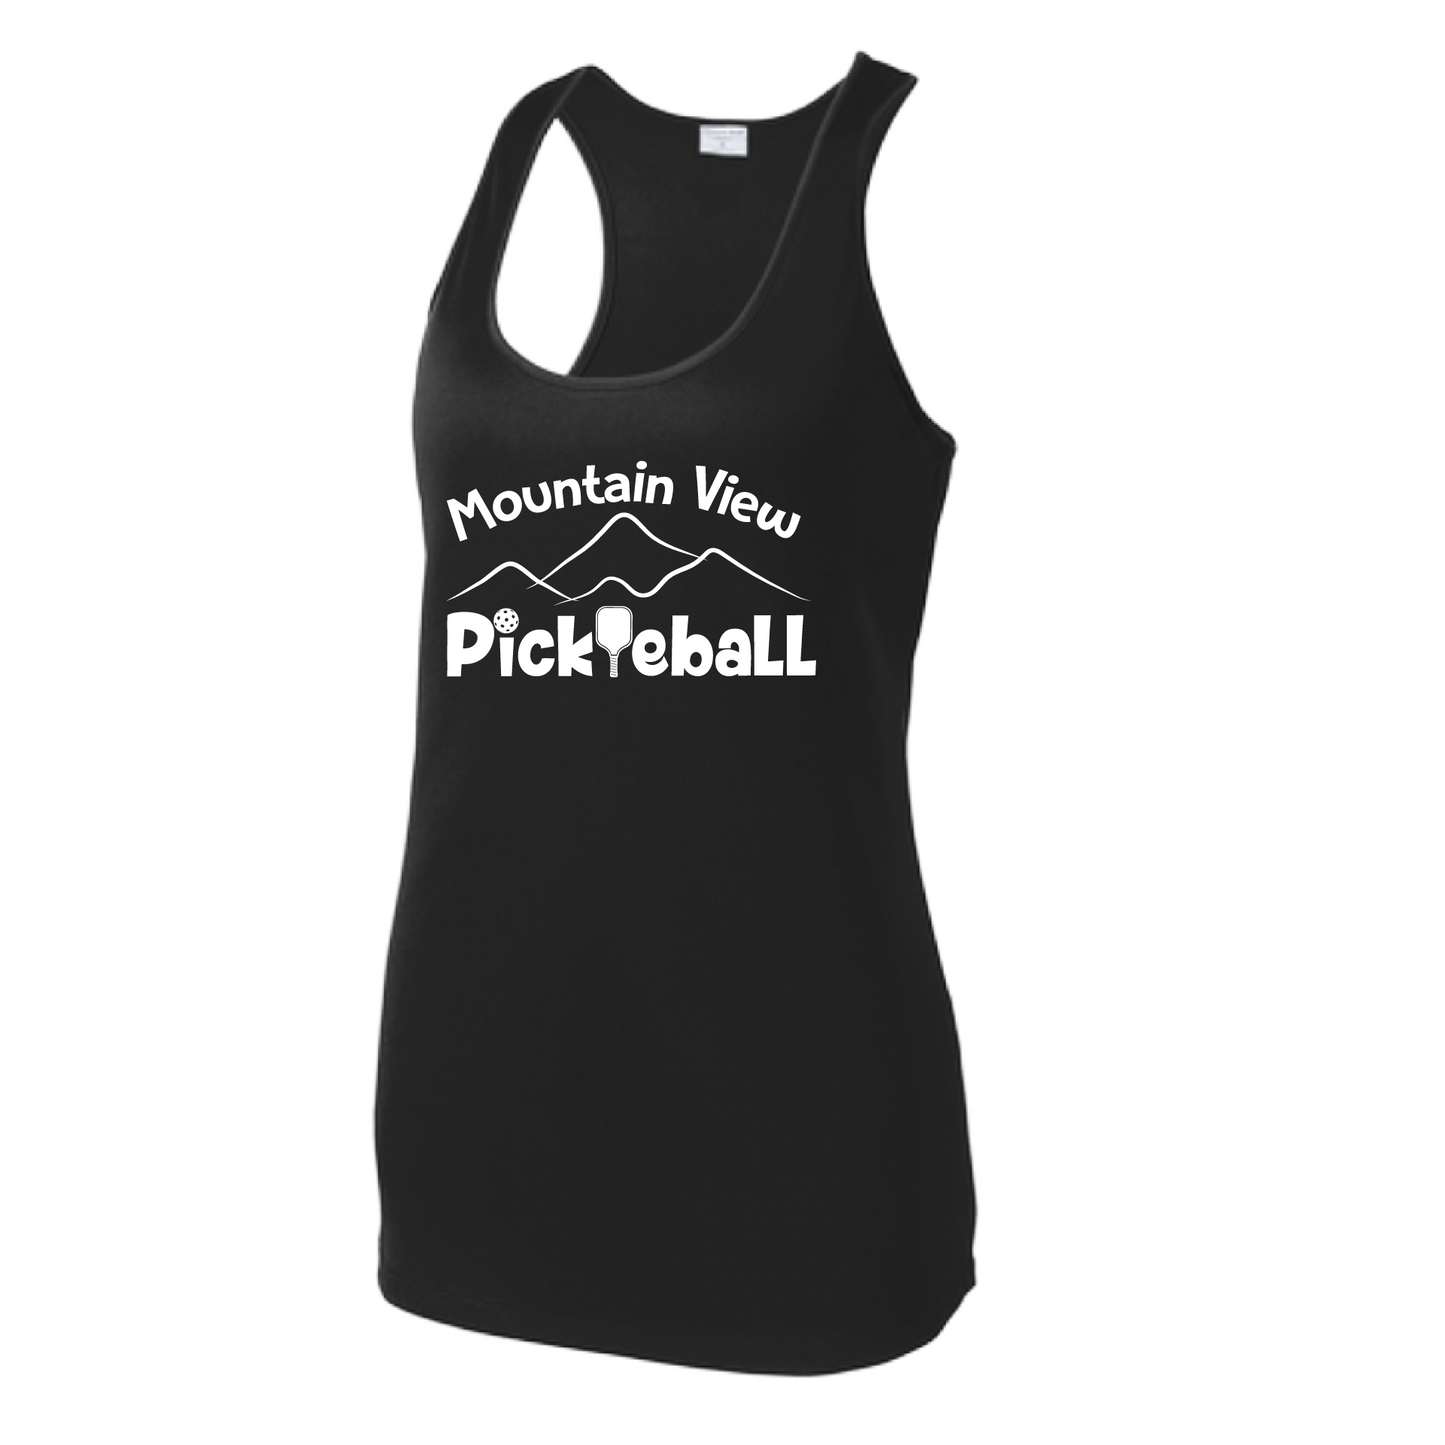 Pickleball Design: Mountain View Pickleball Club  Women's Style: Racerback Tank  Turn up the volume in this Women's shirt with its perfect mix of softness and attitude. Material is ultra-comfortable with moisture wicking properties and tri-blend softness. PosiCharge technology locks in color. Highly breathable and lightweight.